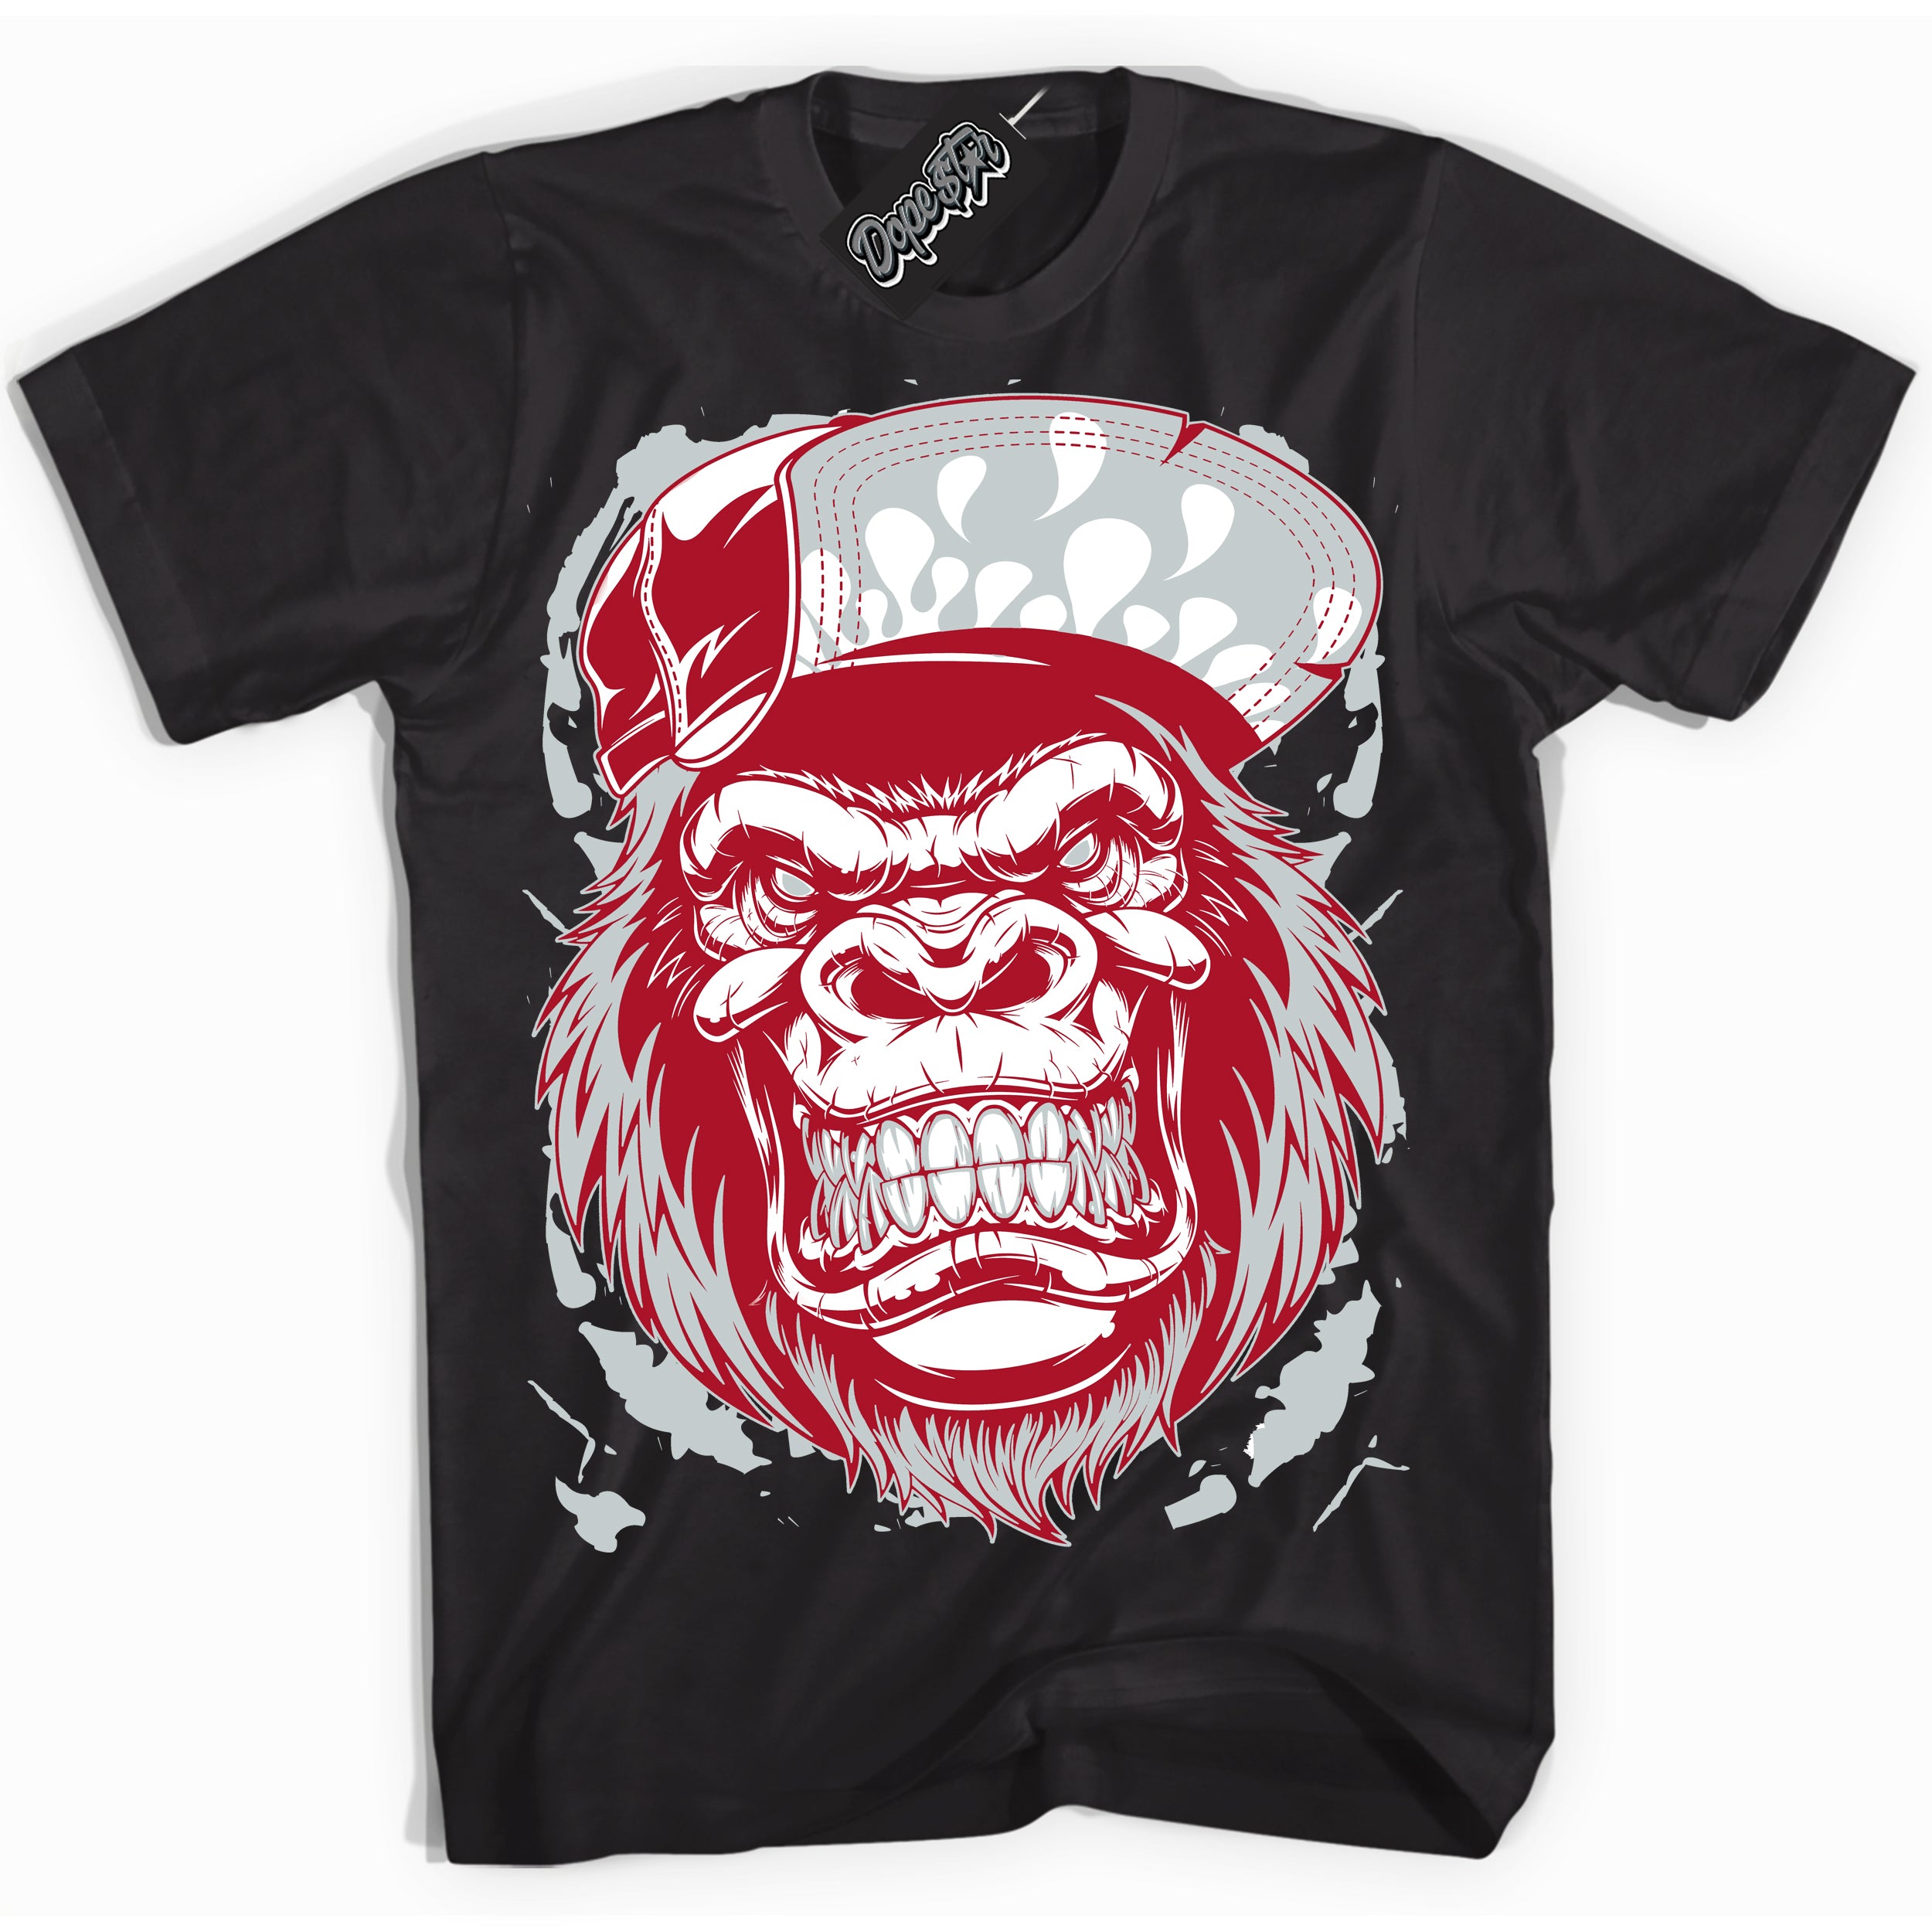 Cool Black Shirt with “ Gorilla Beast” design that perfectly matches Reverse Ultraman Sneakers.